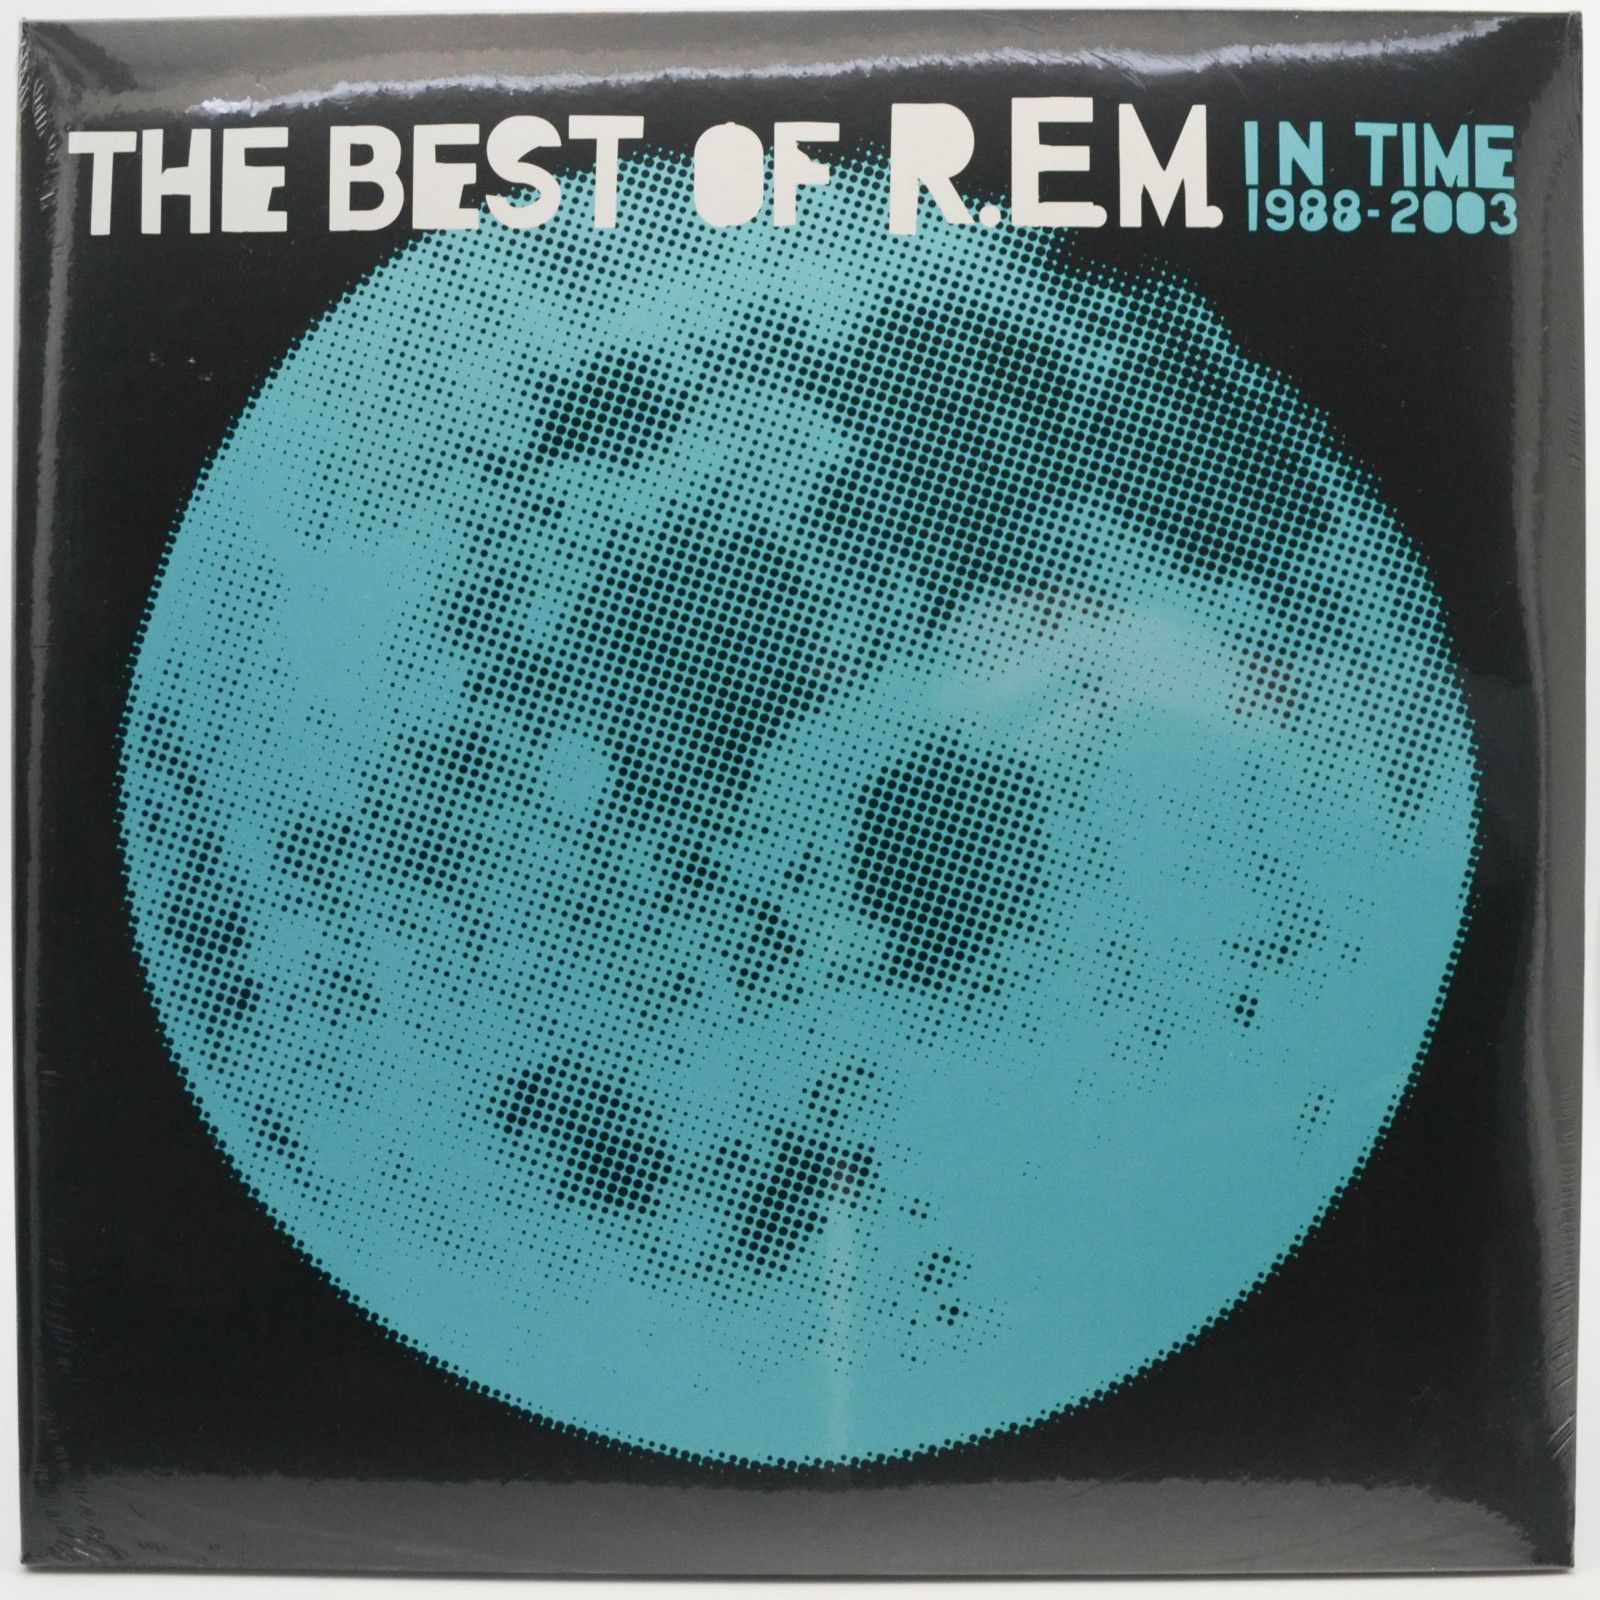 R.E.M. — In Time: The Best Of R.E.M. 1988-2003 (2LP), 2003